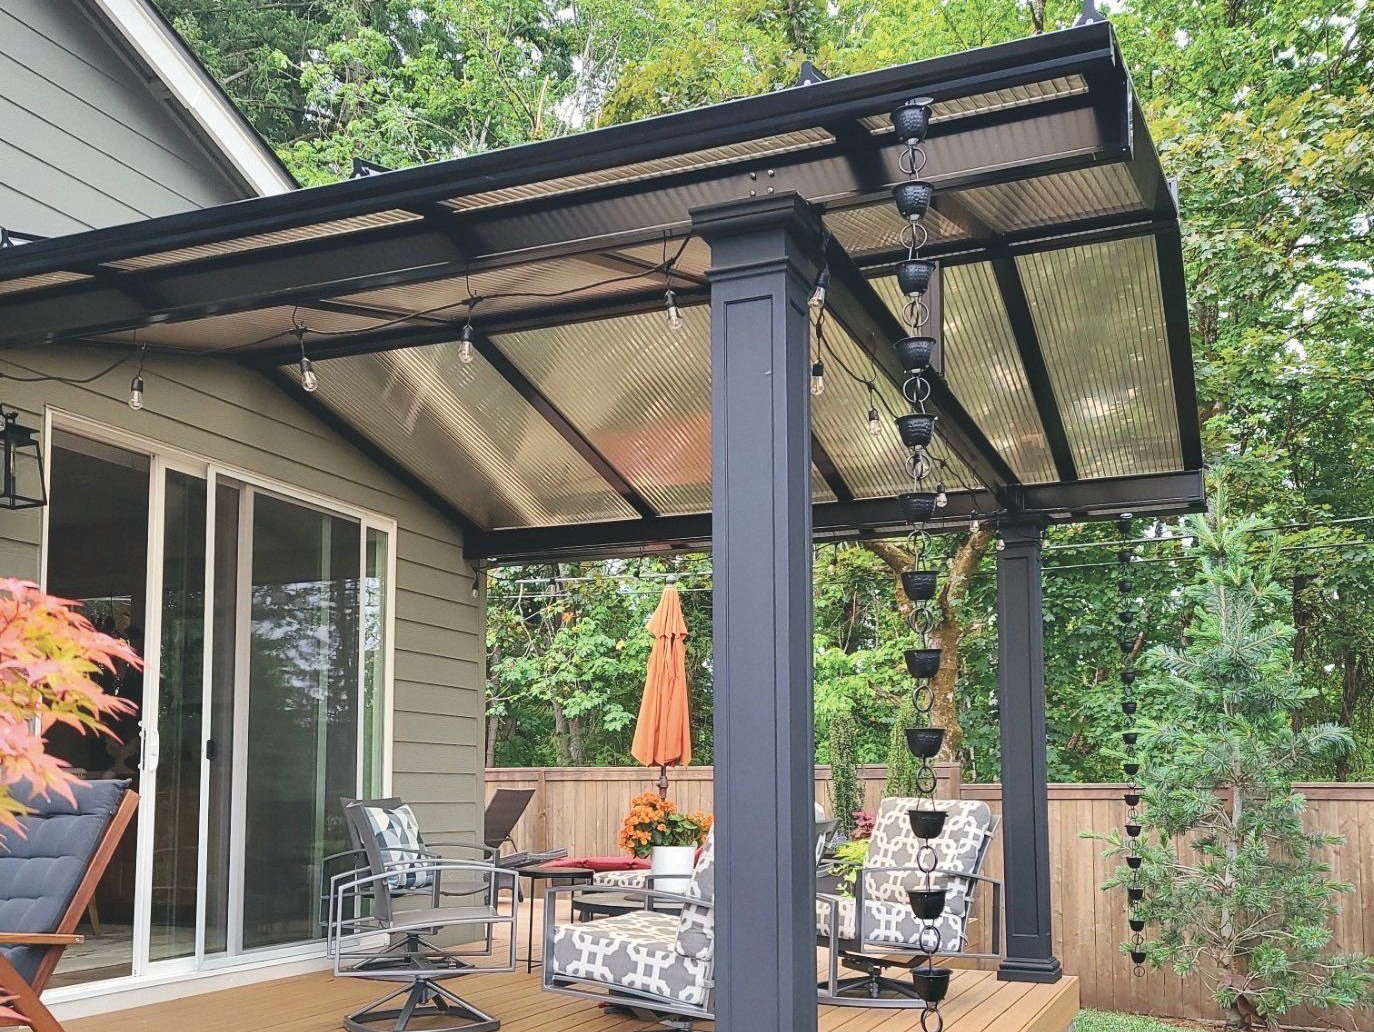 Patio Covers in N.E. Portland Oregon - Gable Roof with ACRYLITE Acrylic